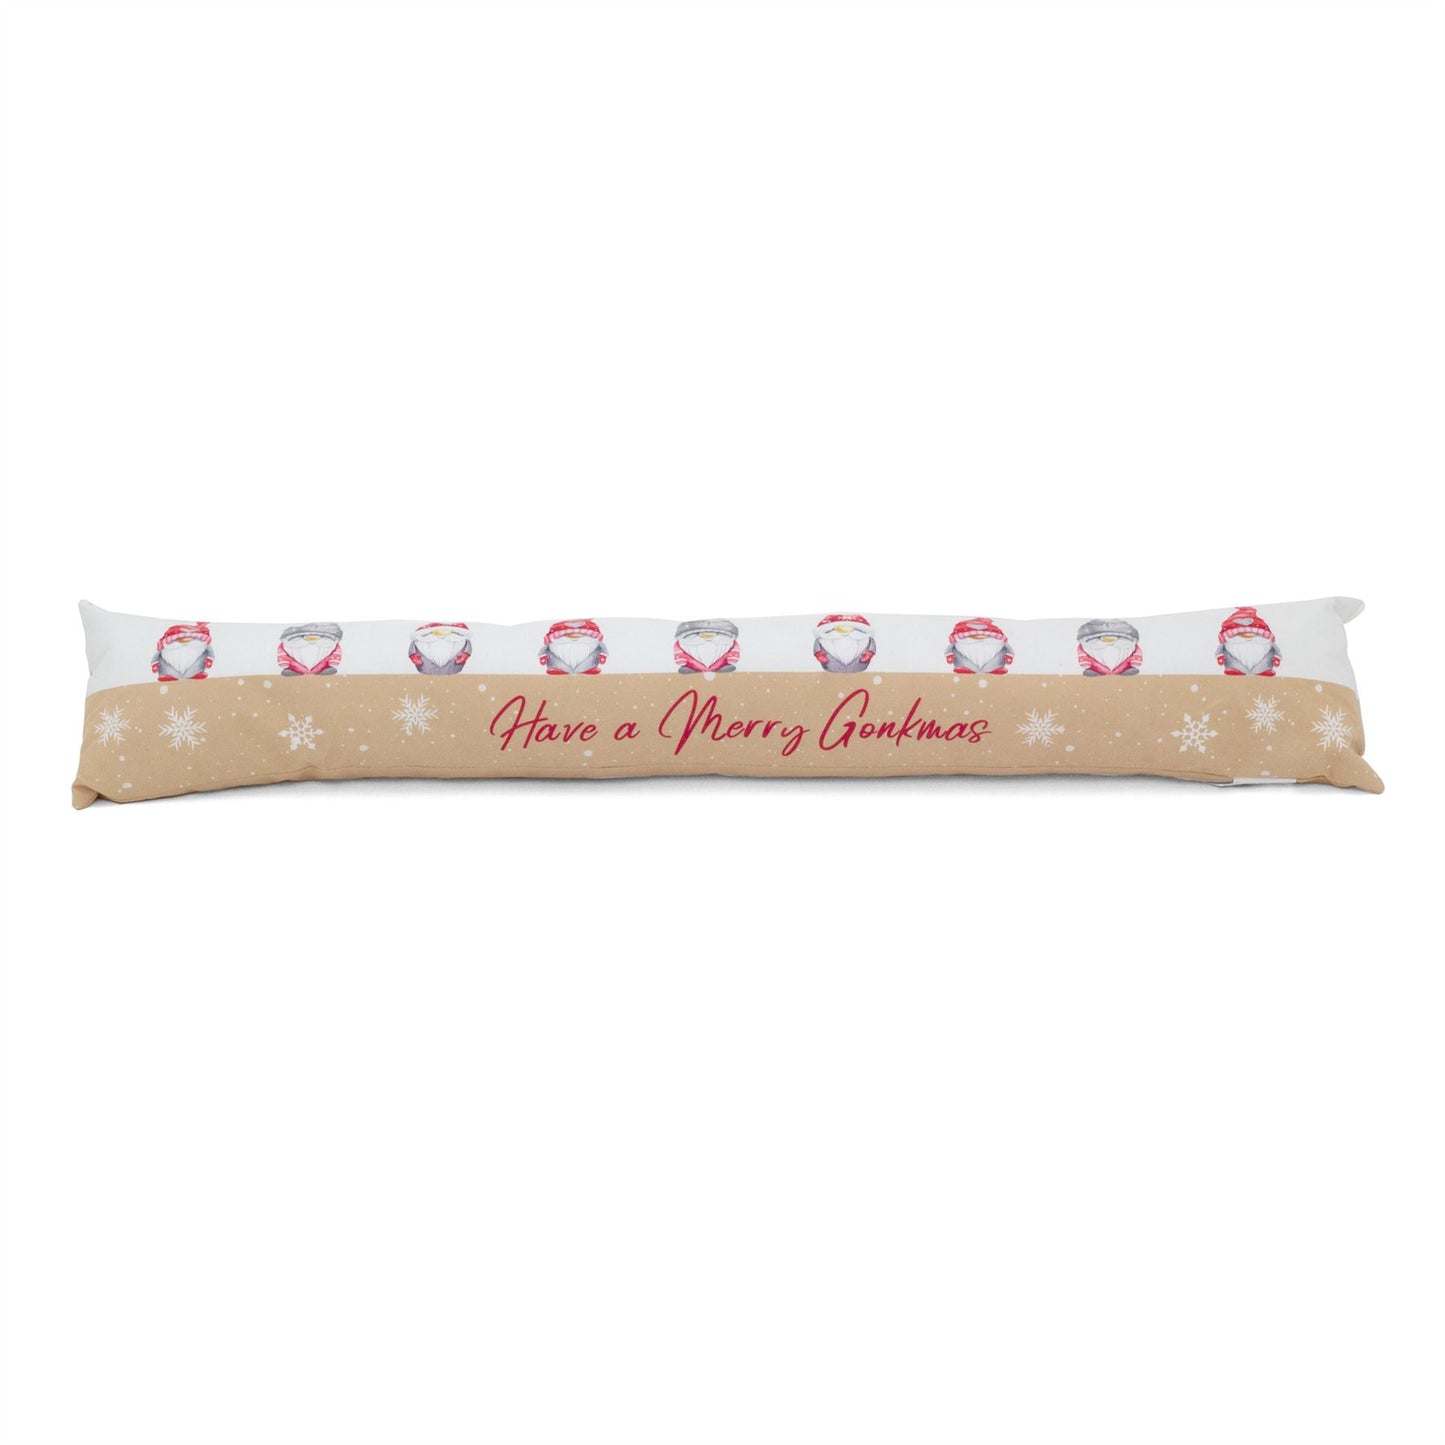 Gonkmas Draught Excluder | Fabric Gonk Christmas Door Draught Excluder - 82cm